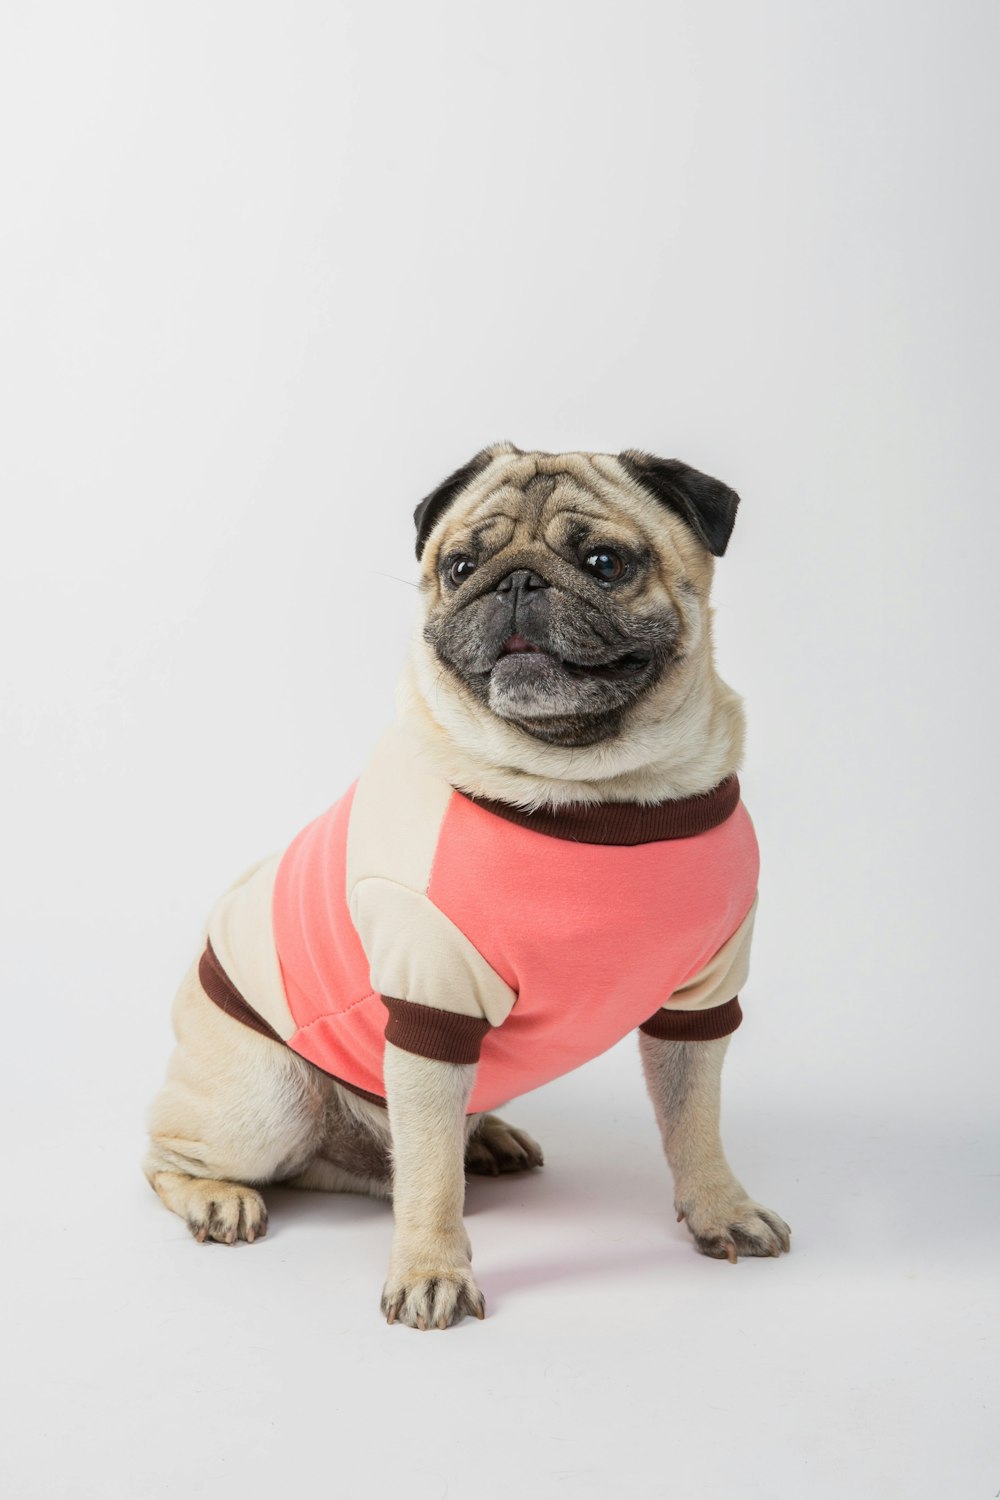 fawn pug wearing red and white striped shirt